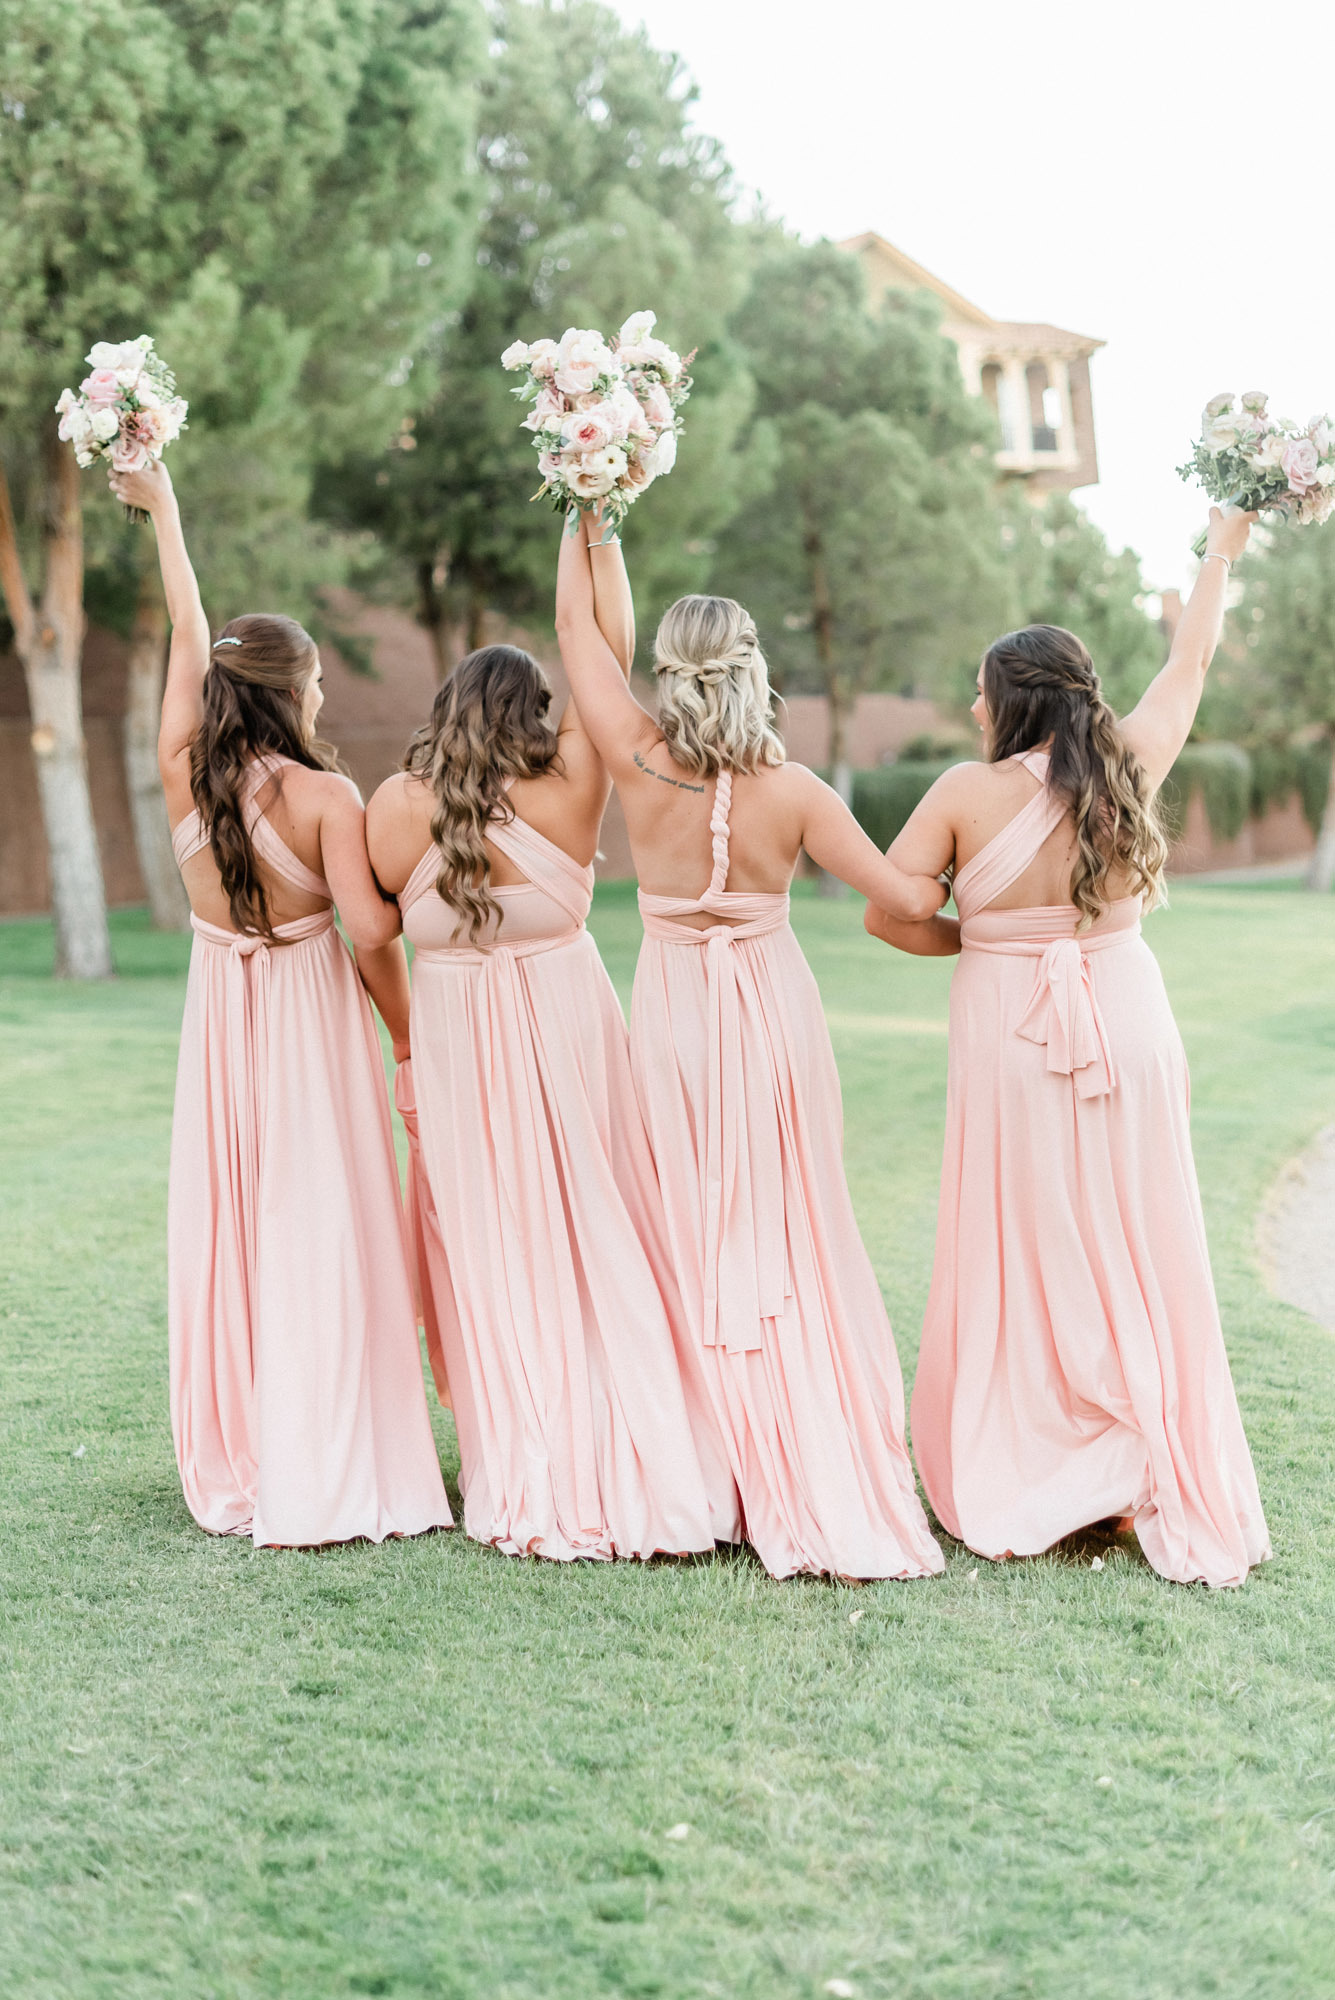 Bridal Party Hair & Makeup Q&A With Meg | Makeup in the 702